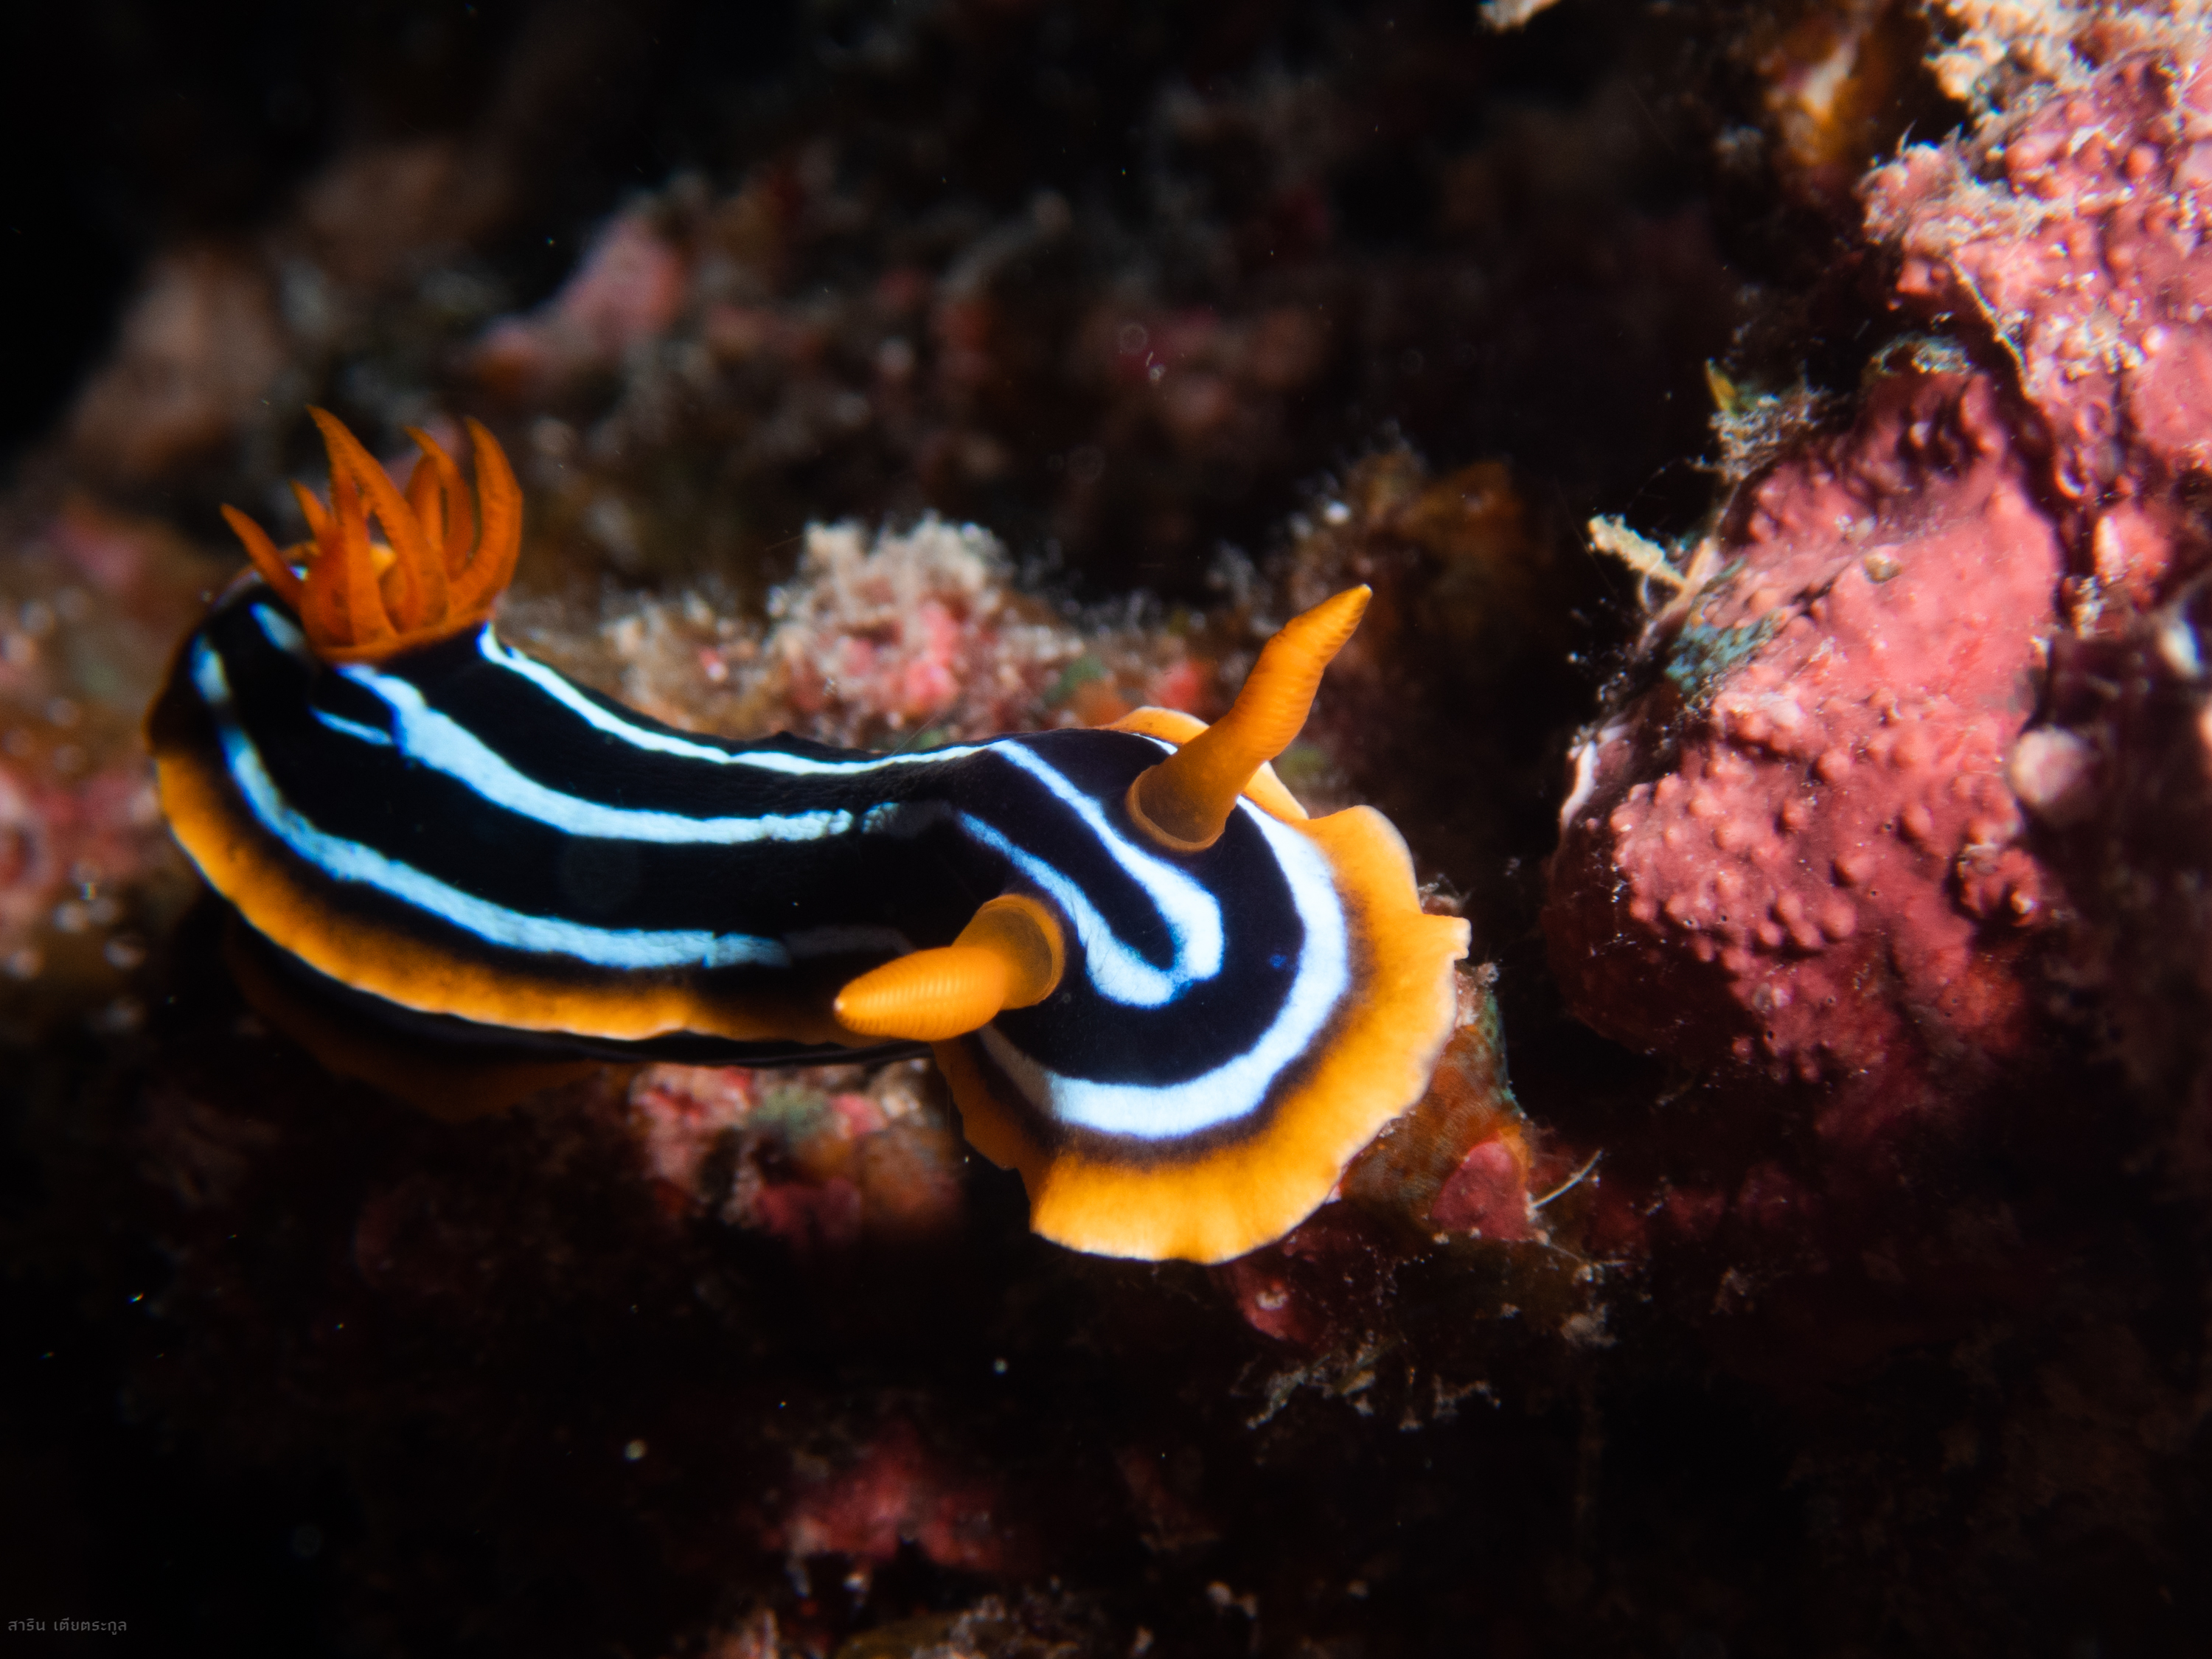 *Chromodoris kuiteri* I only noticed this is not the same with *C. elisabethina* only after reviewing the photo.